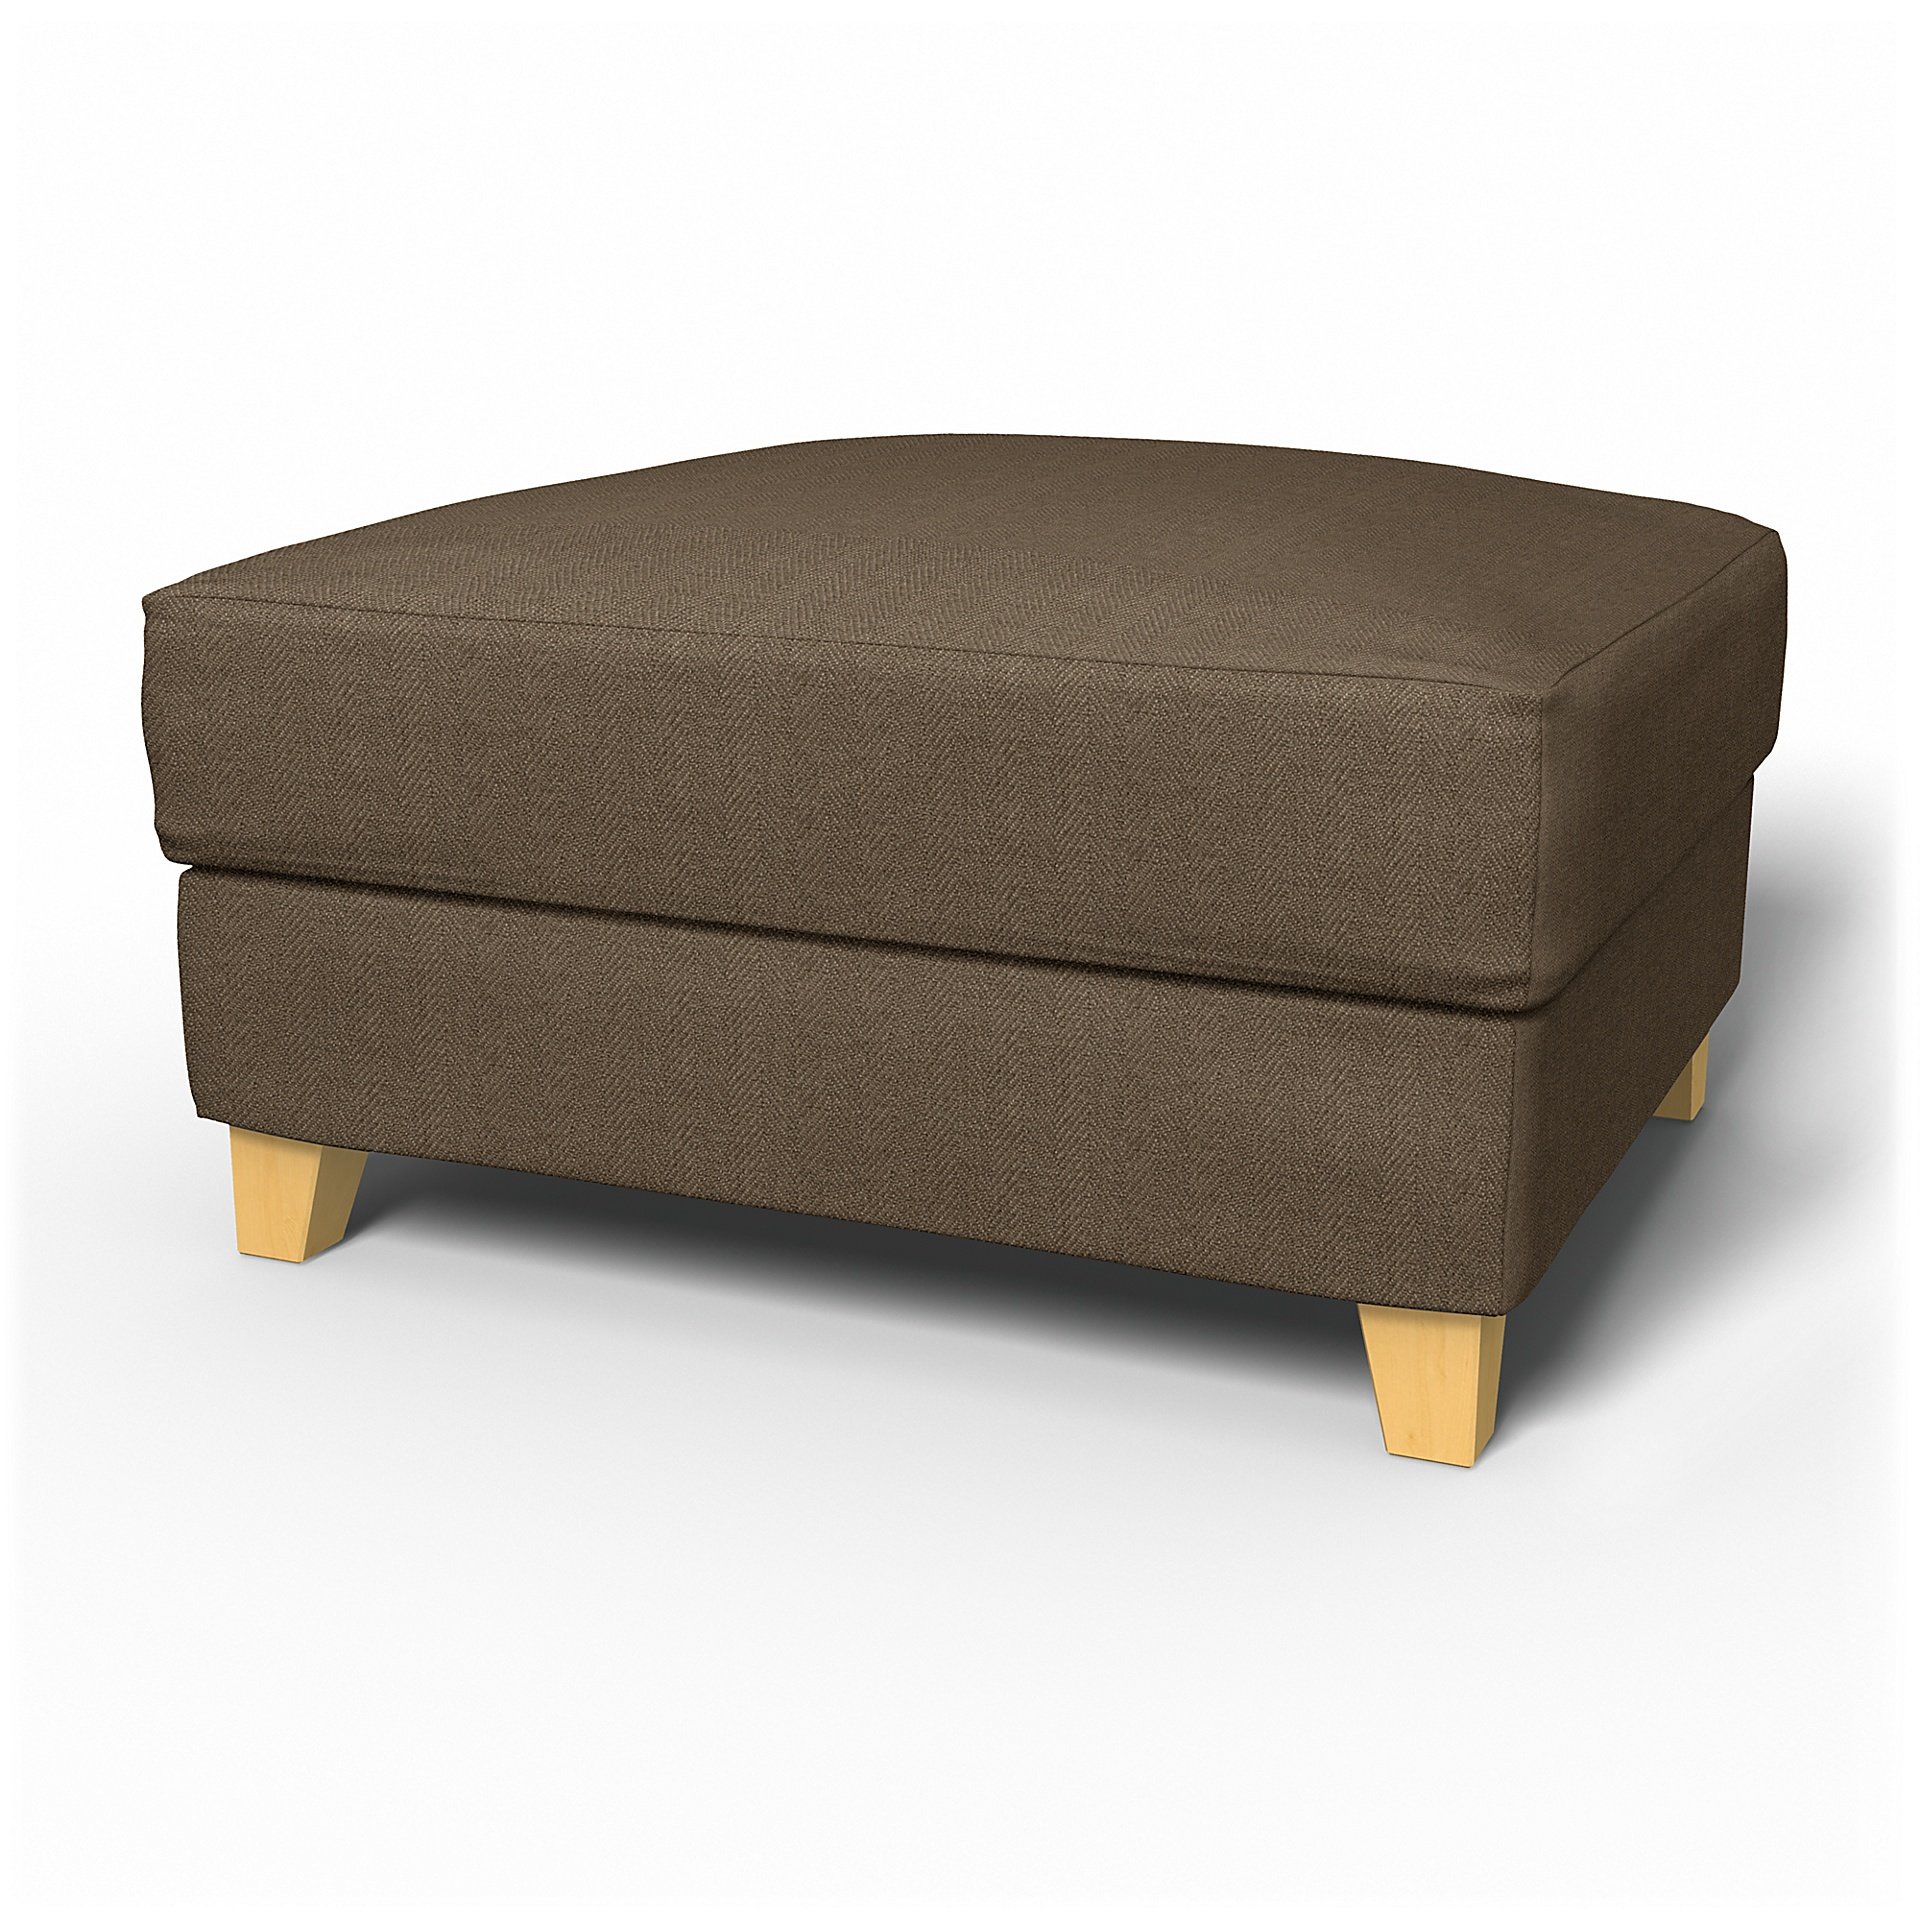 IKEA - Backa Footstool Cover, Dark Taupe, Boucle & Texture - Bemz